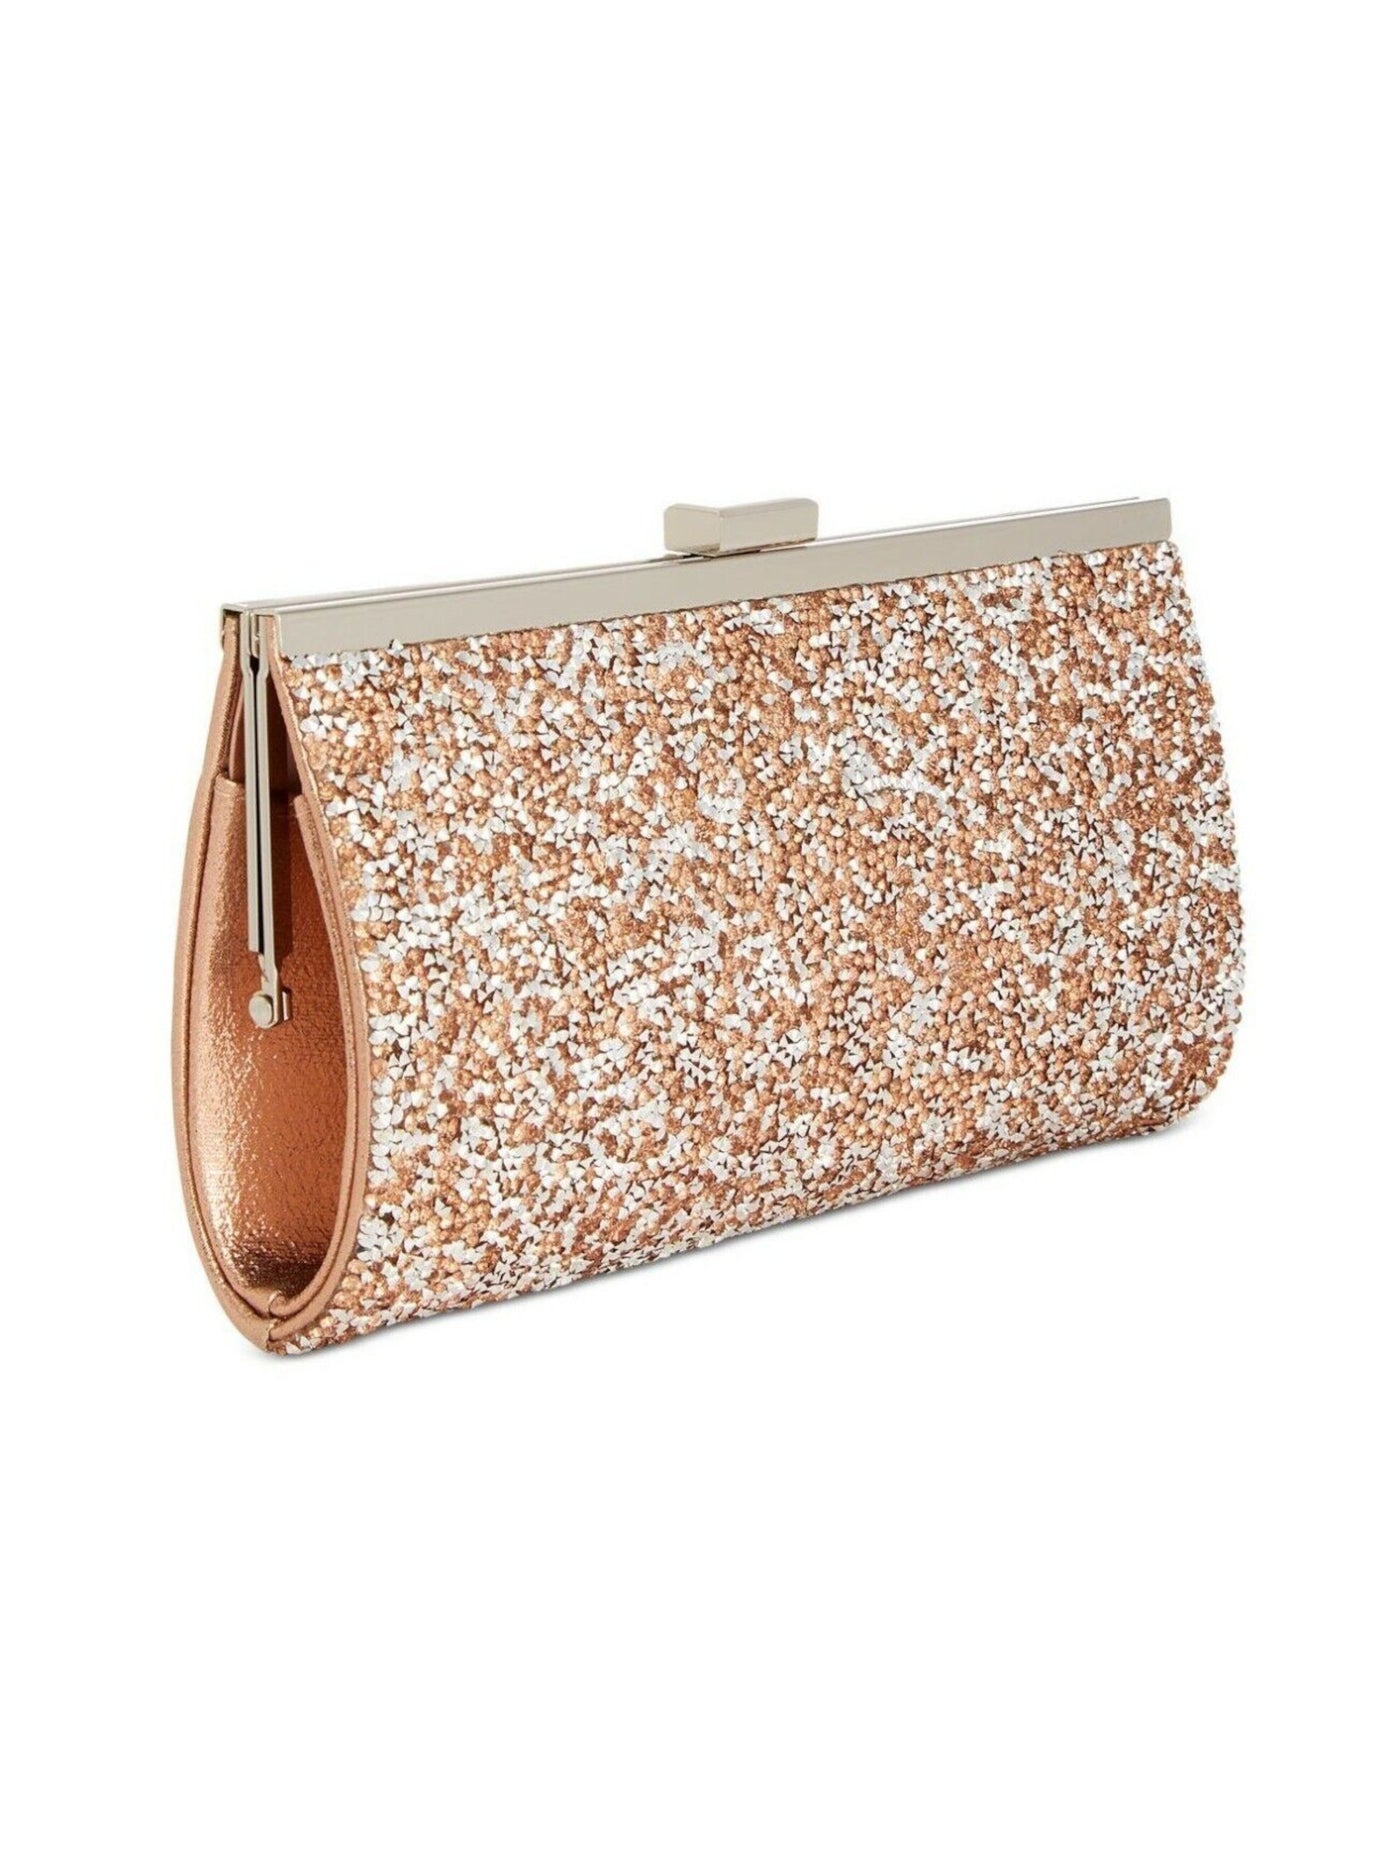 INC Women's Gold Lexy Embellished Polyester Mixed Media Chain Strap Clutch Handbag Purse